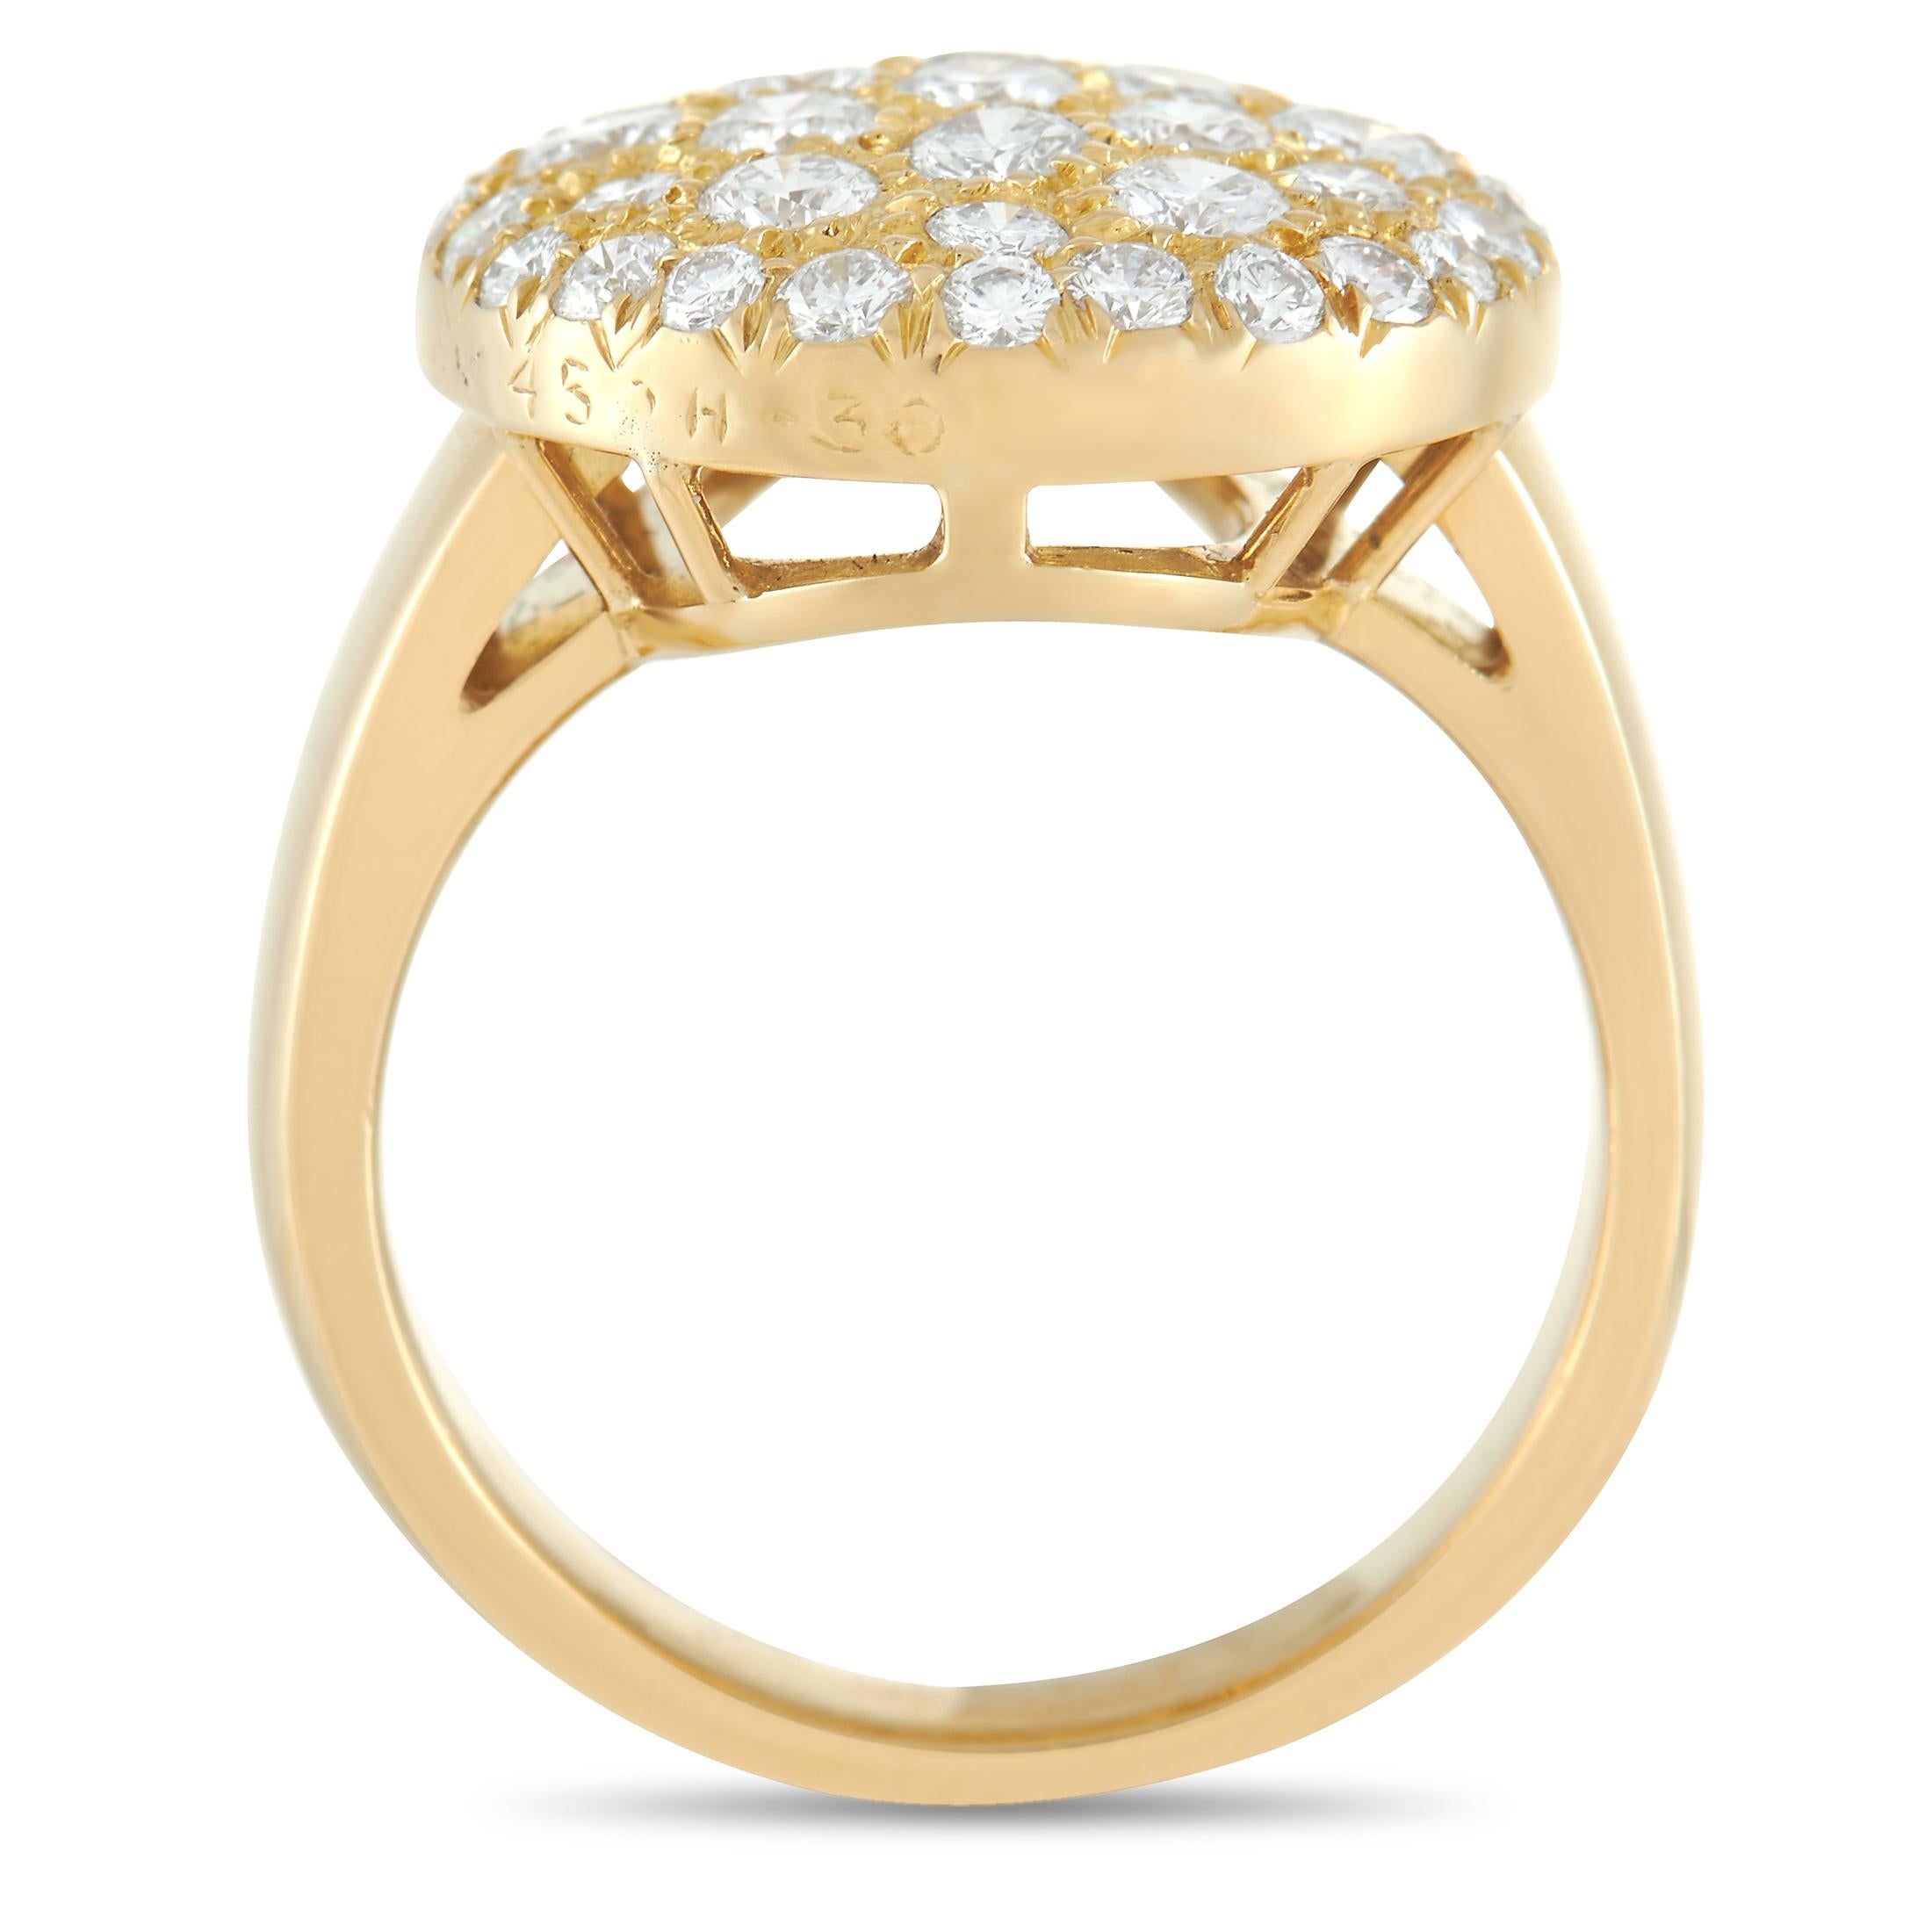 This stylish ring from Van Cleef & Arpels will continually make a sparkling statement. This 18K Yellow Gold ring - which features a 4mm band and a 4mm top height - comes to life thanks to the domed top adorned with 1.50 carats of diamonds with E